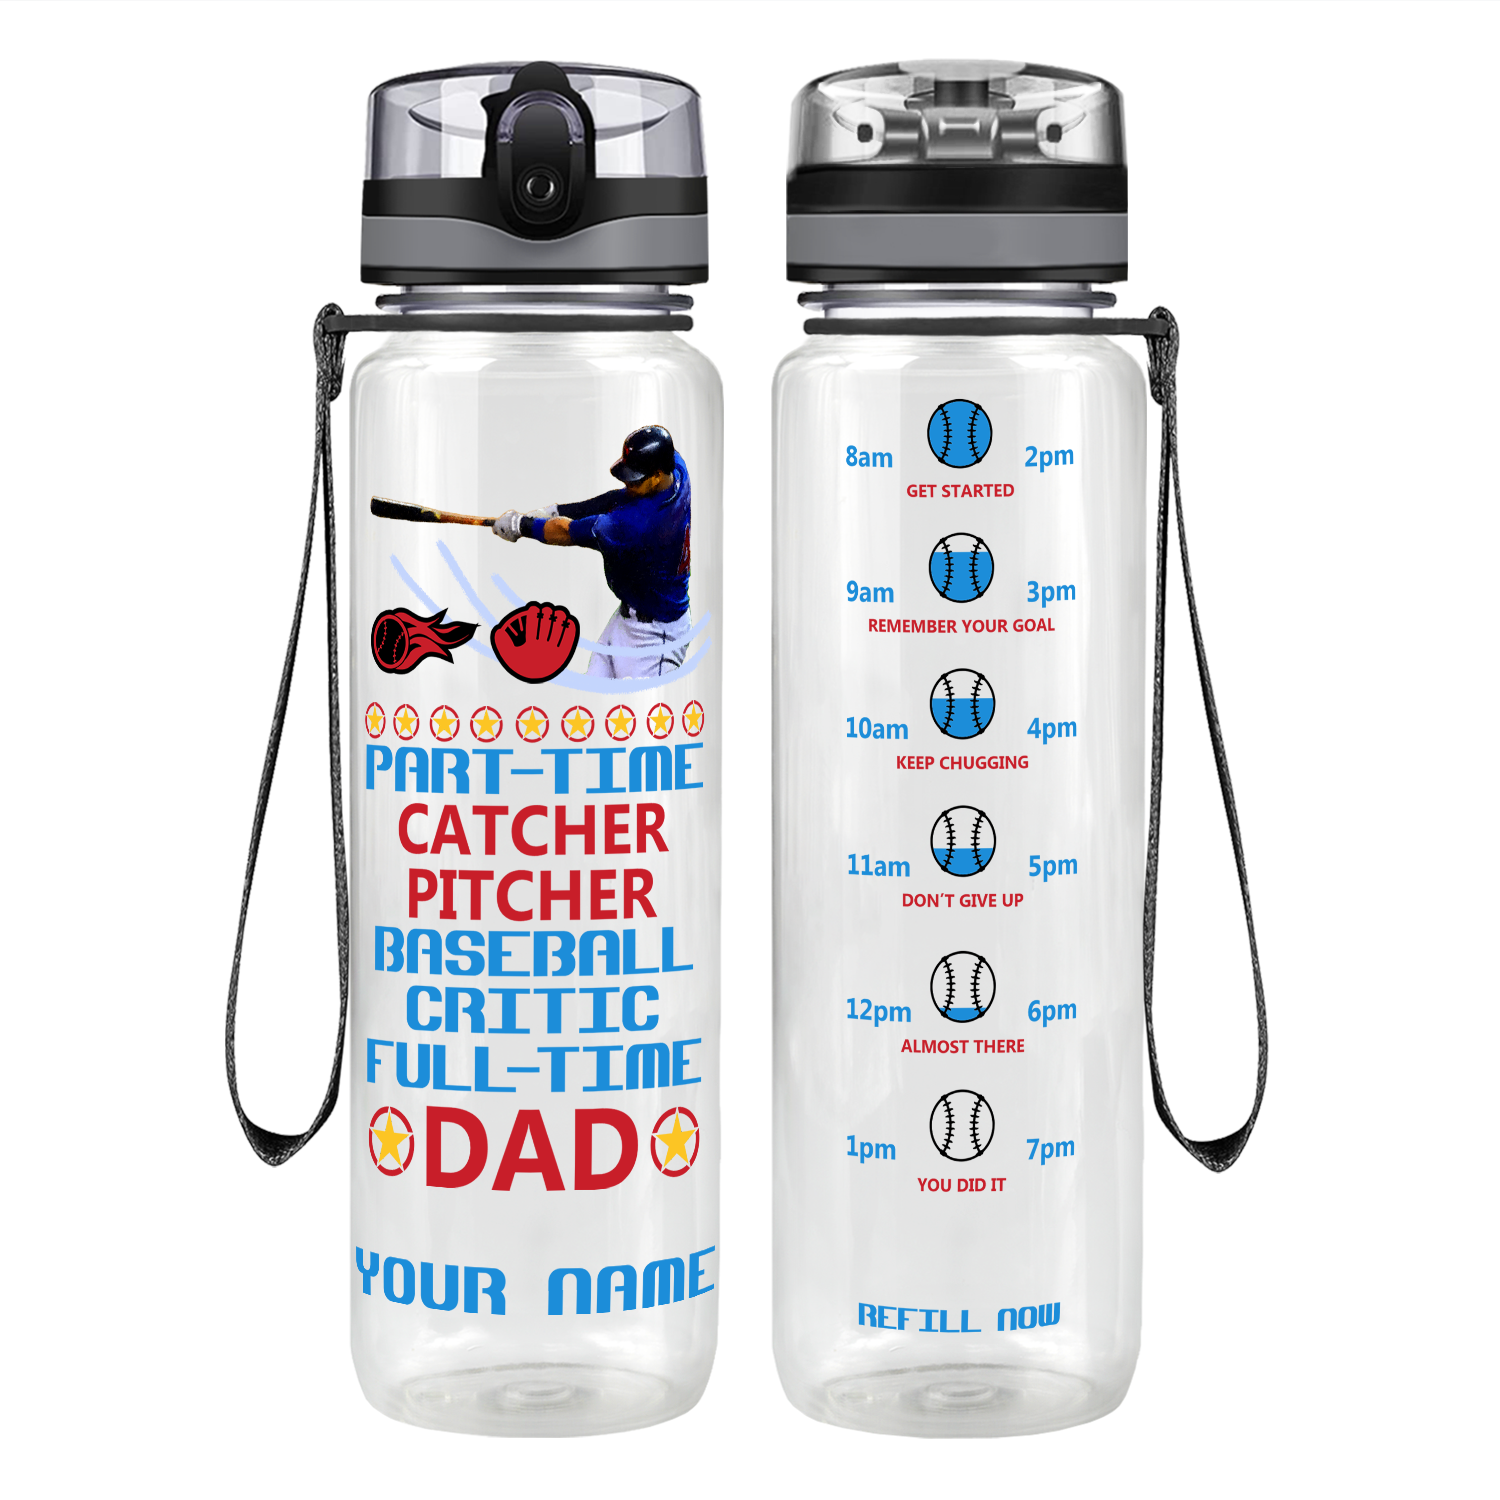 Personalized Part-Time Catcher Pitcher Full Time Dad on 32 oz Motivational Tracking Baseball Water Bottle